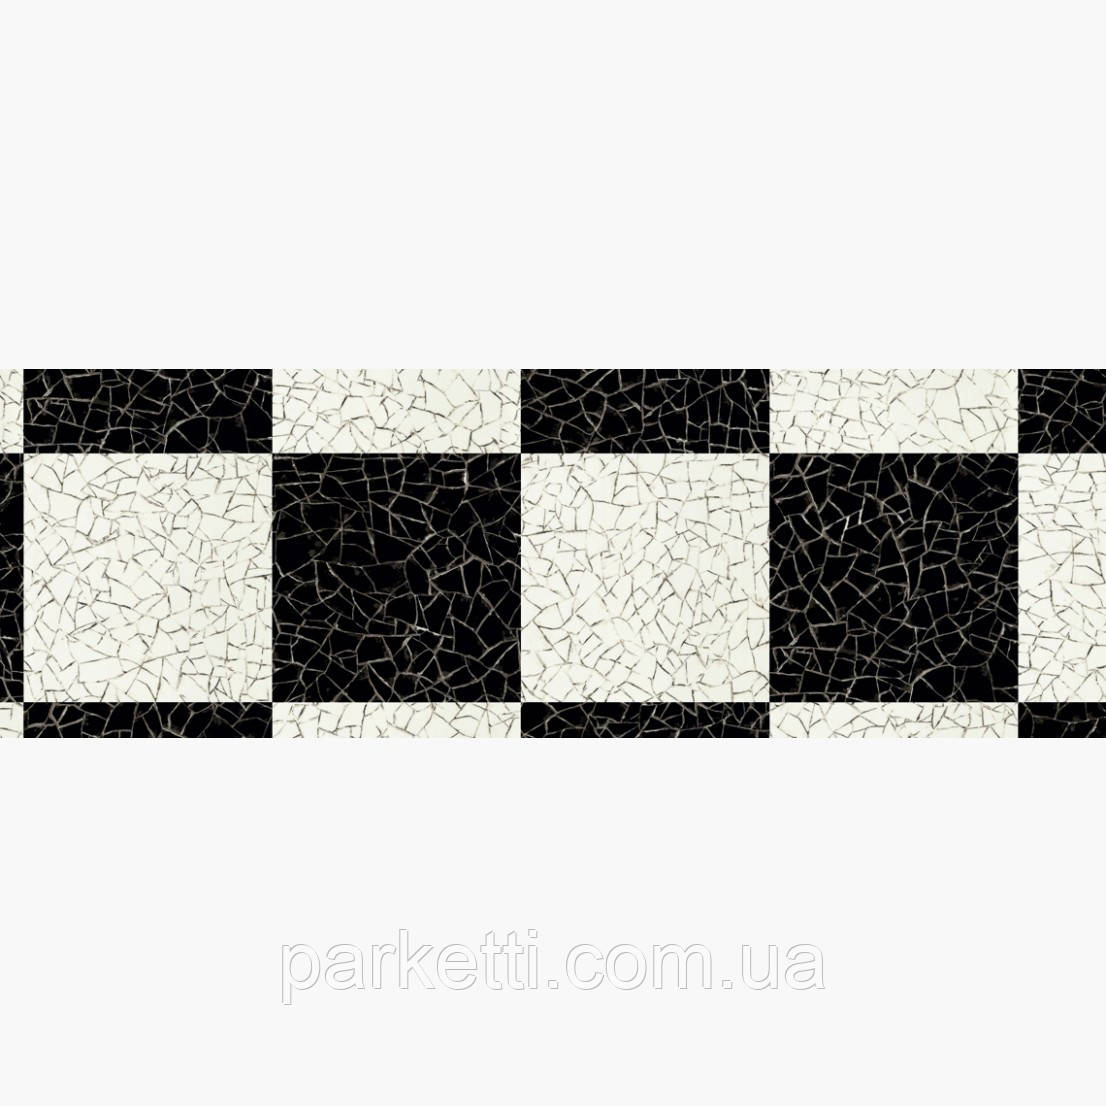 Expona Commercial Stone and Abstract PUR 5095 Granite Mosaic, виниловая плитка клеевая Polyflor - фото 5 - id-p781804304